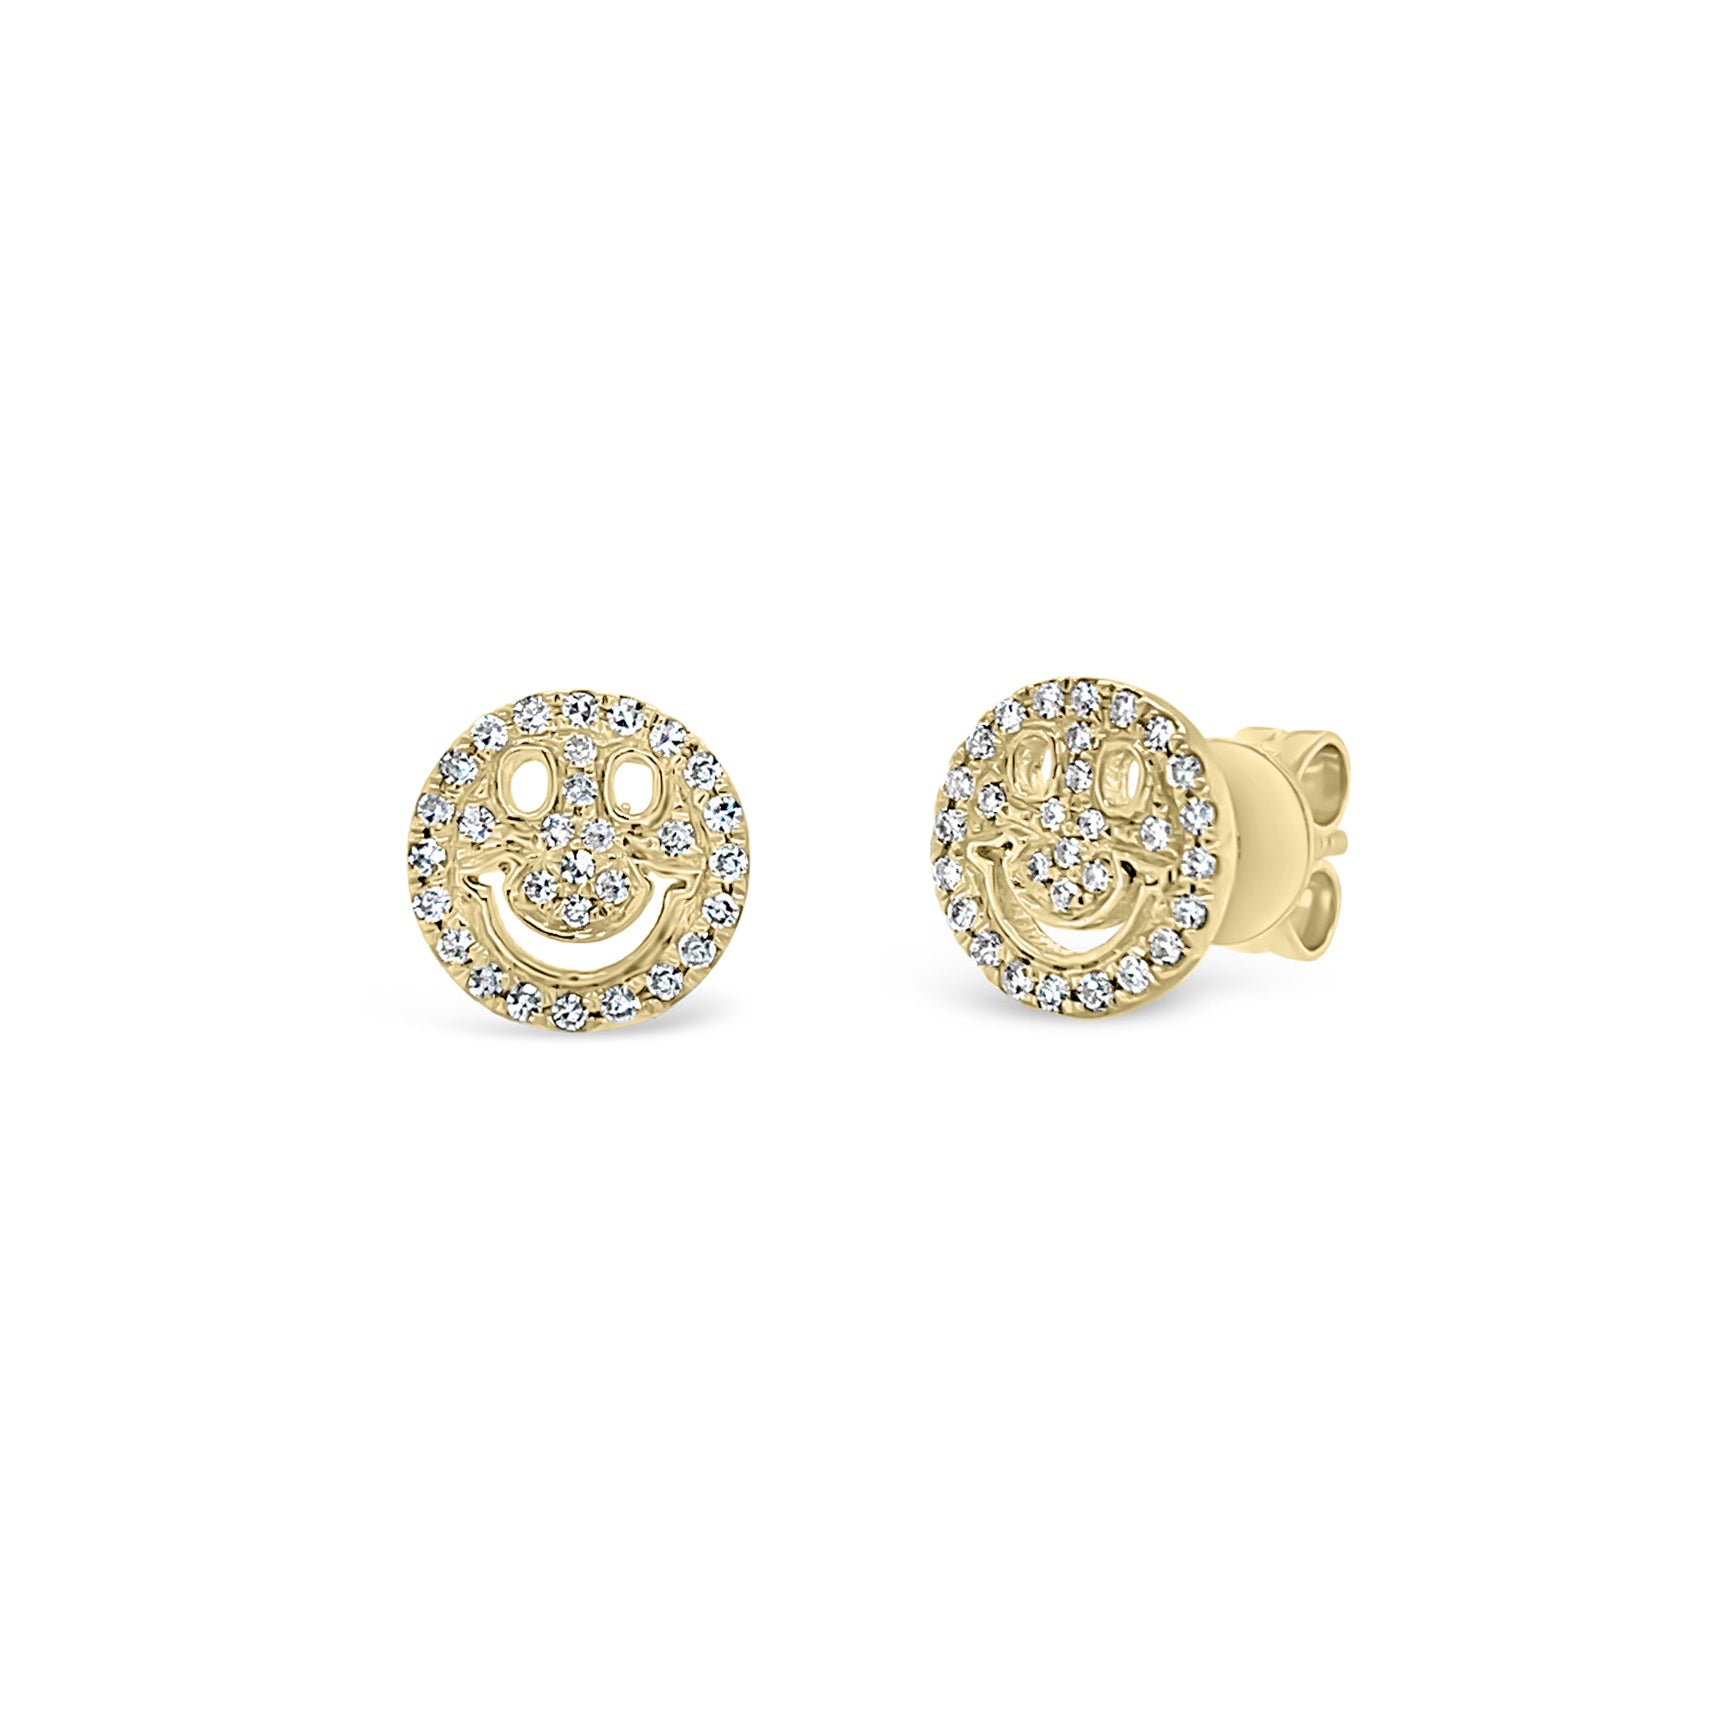 Diamond Smiley Face Stud Earrings - 14K gold weighting 1.55 grams. - 60 Round diamonds totaling .17 carat weight